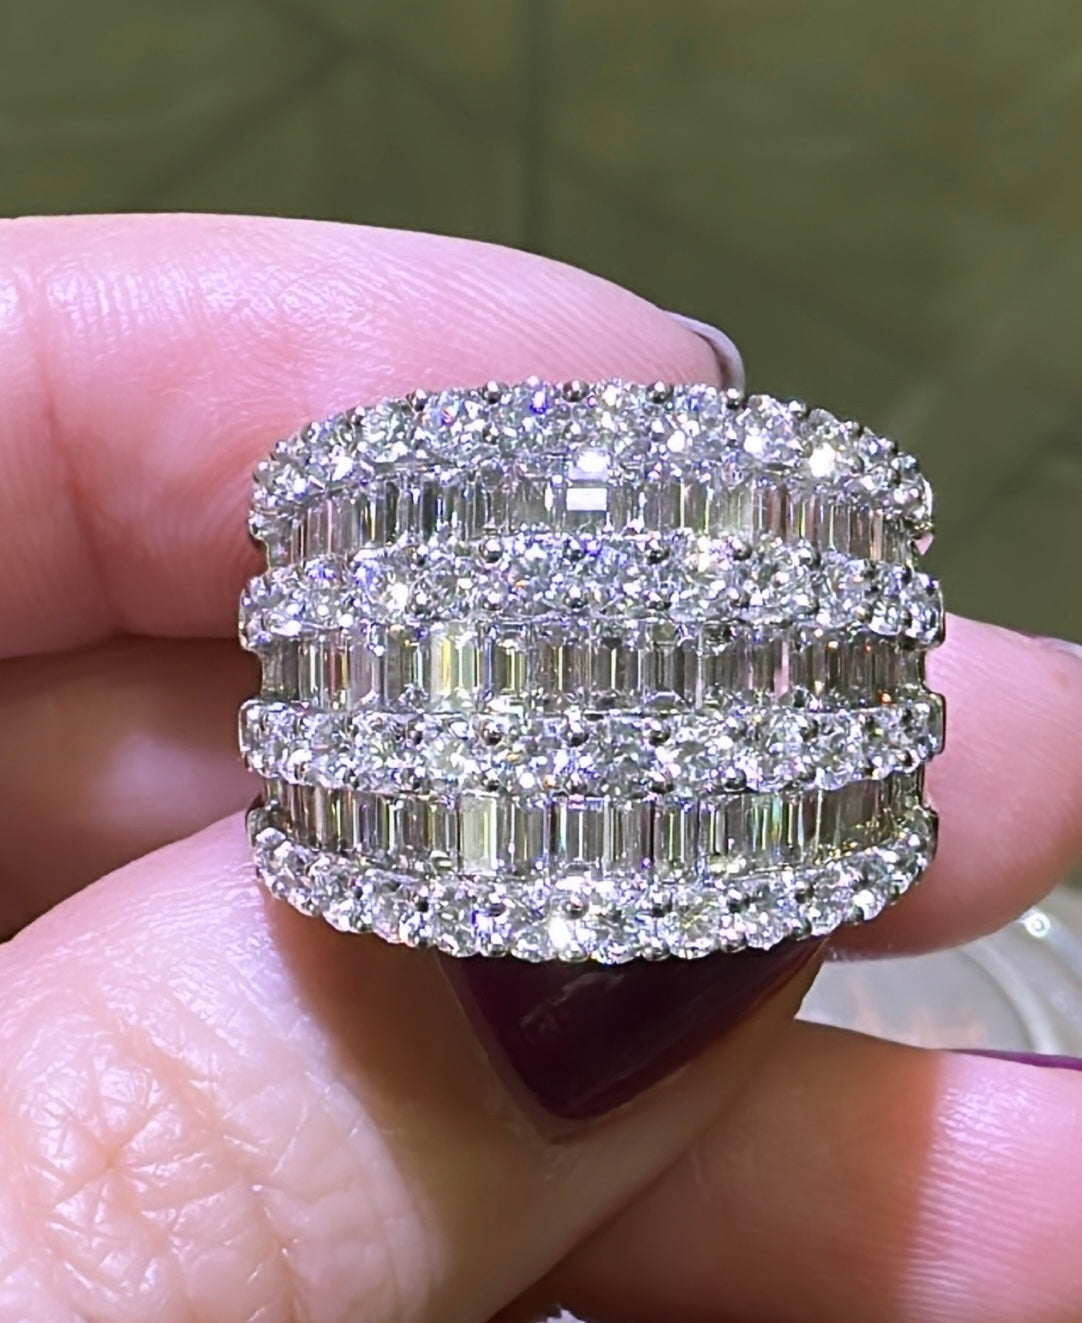 3.90ct t.w. Round And Baguette Diamond Fashion Ring